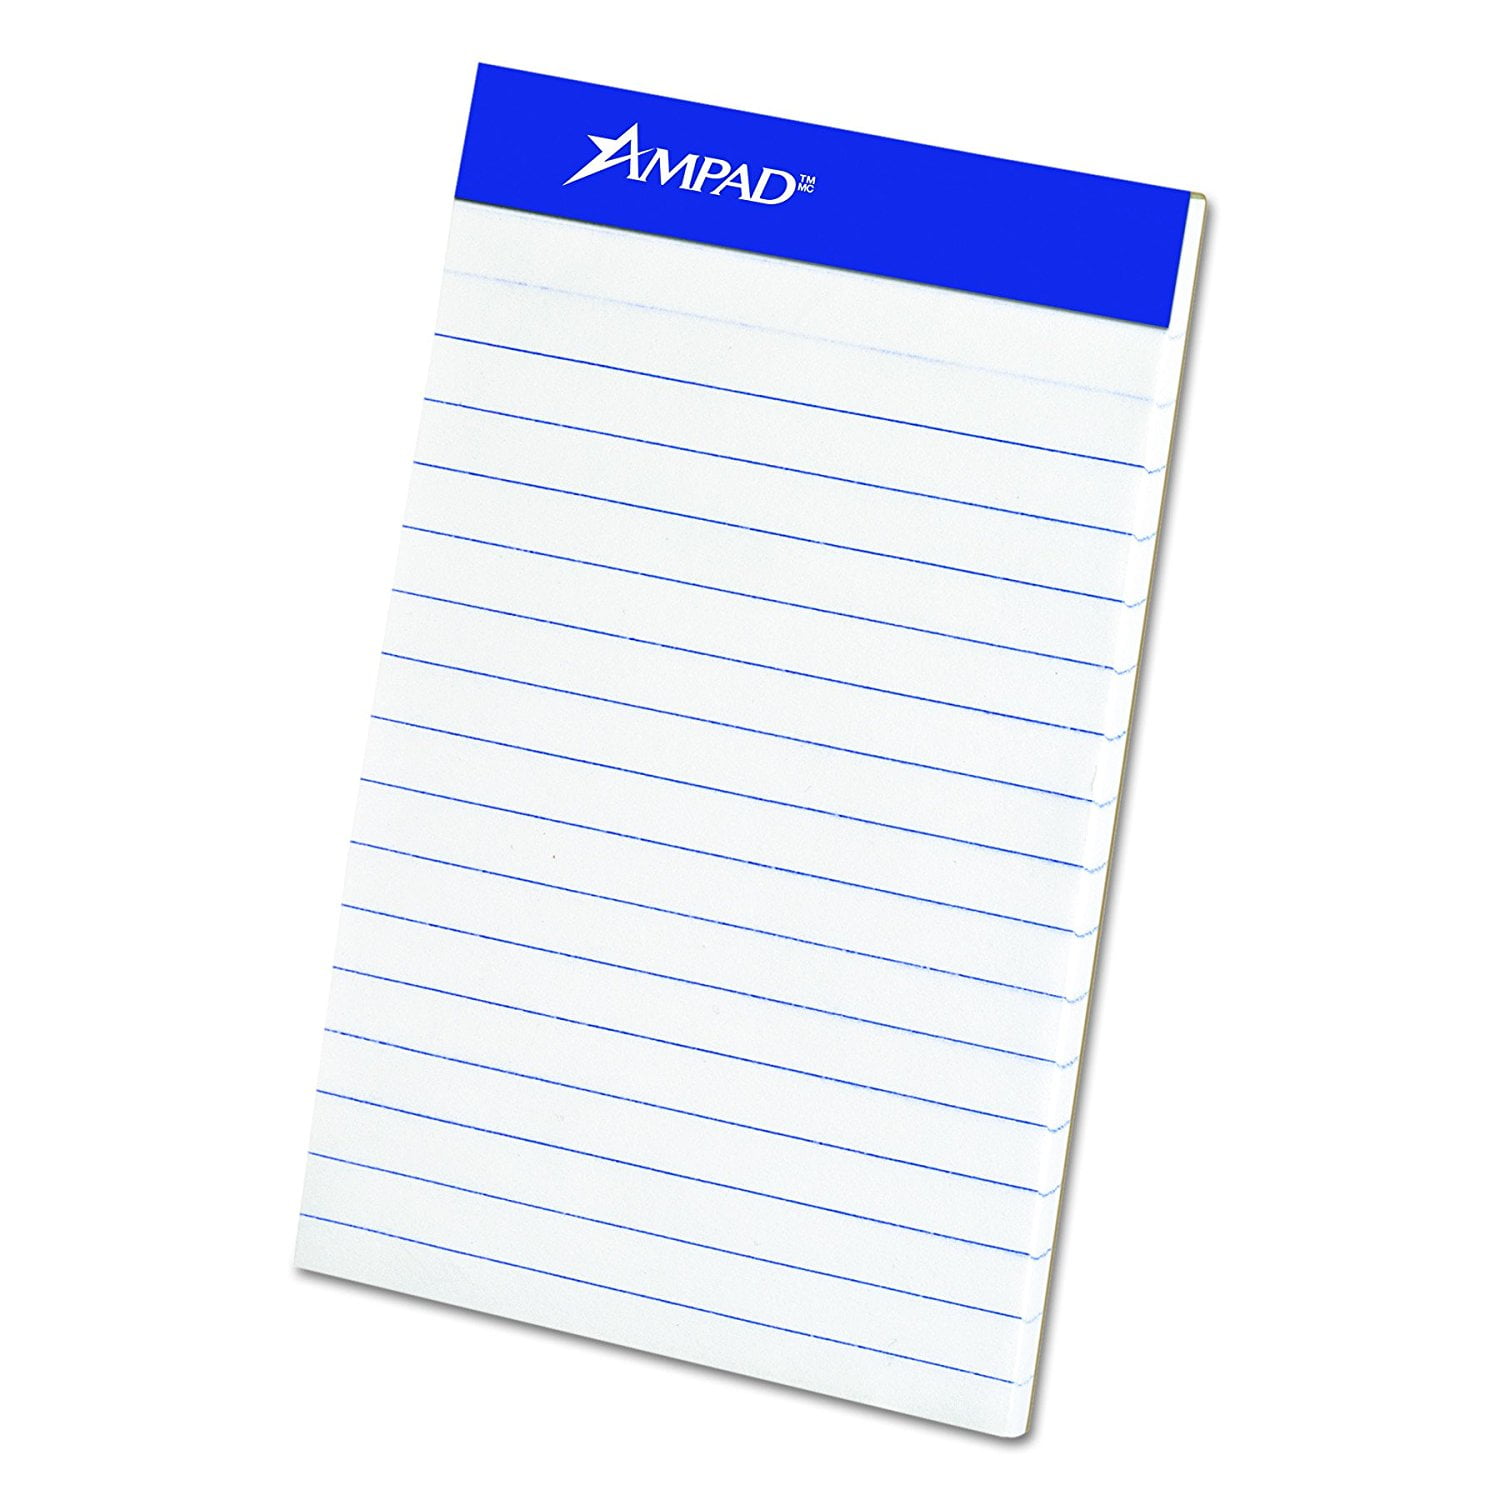 12 Pads of Ampad 20-208 Evidence 3" x 5" Narrow Perforated Writing Pads White 